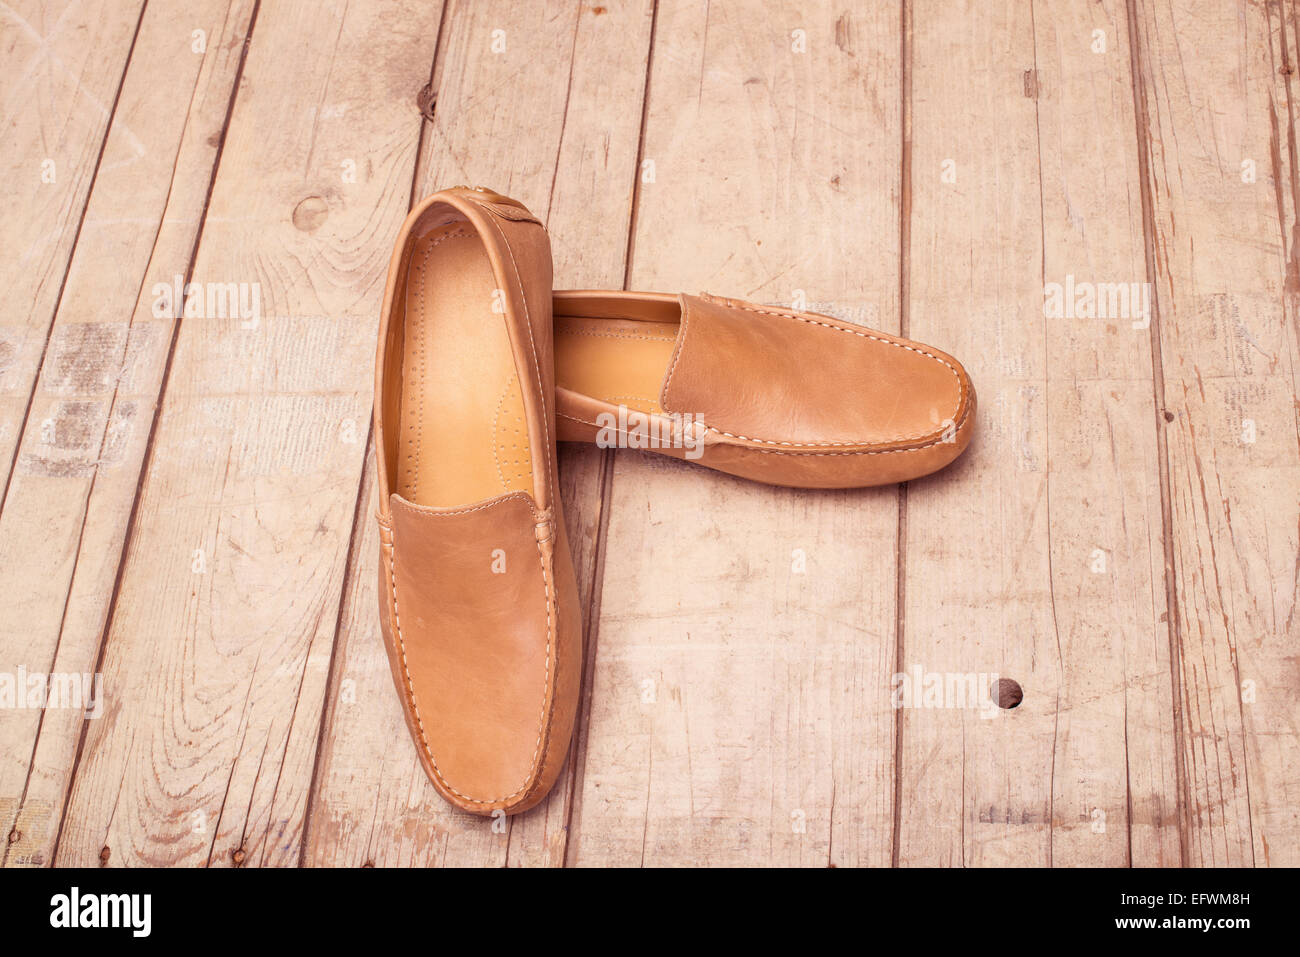 Men's Loafer Shoe on old wood background Stock Photo